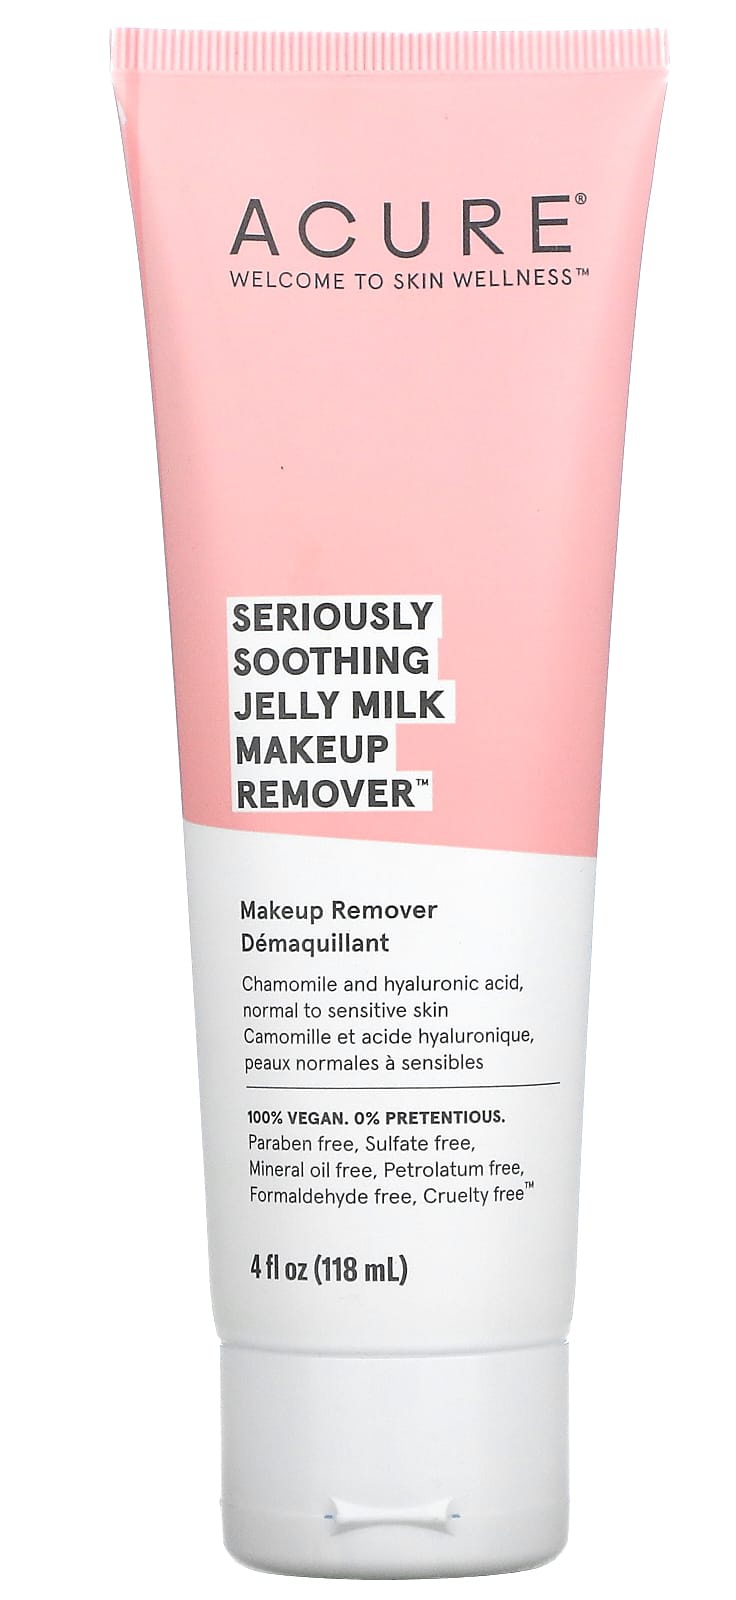 Acure Seriously Soothing Jelly Milk Makeup Remover